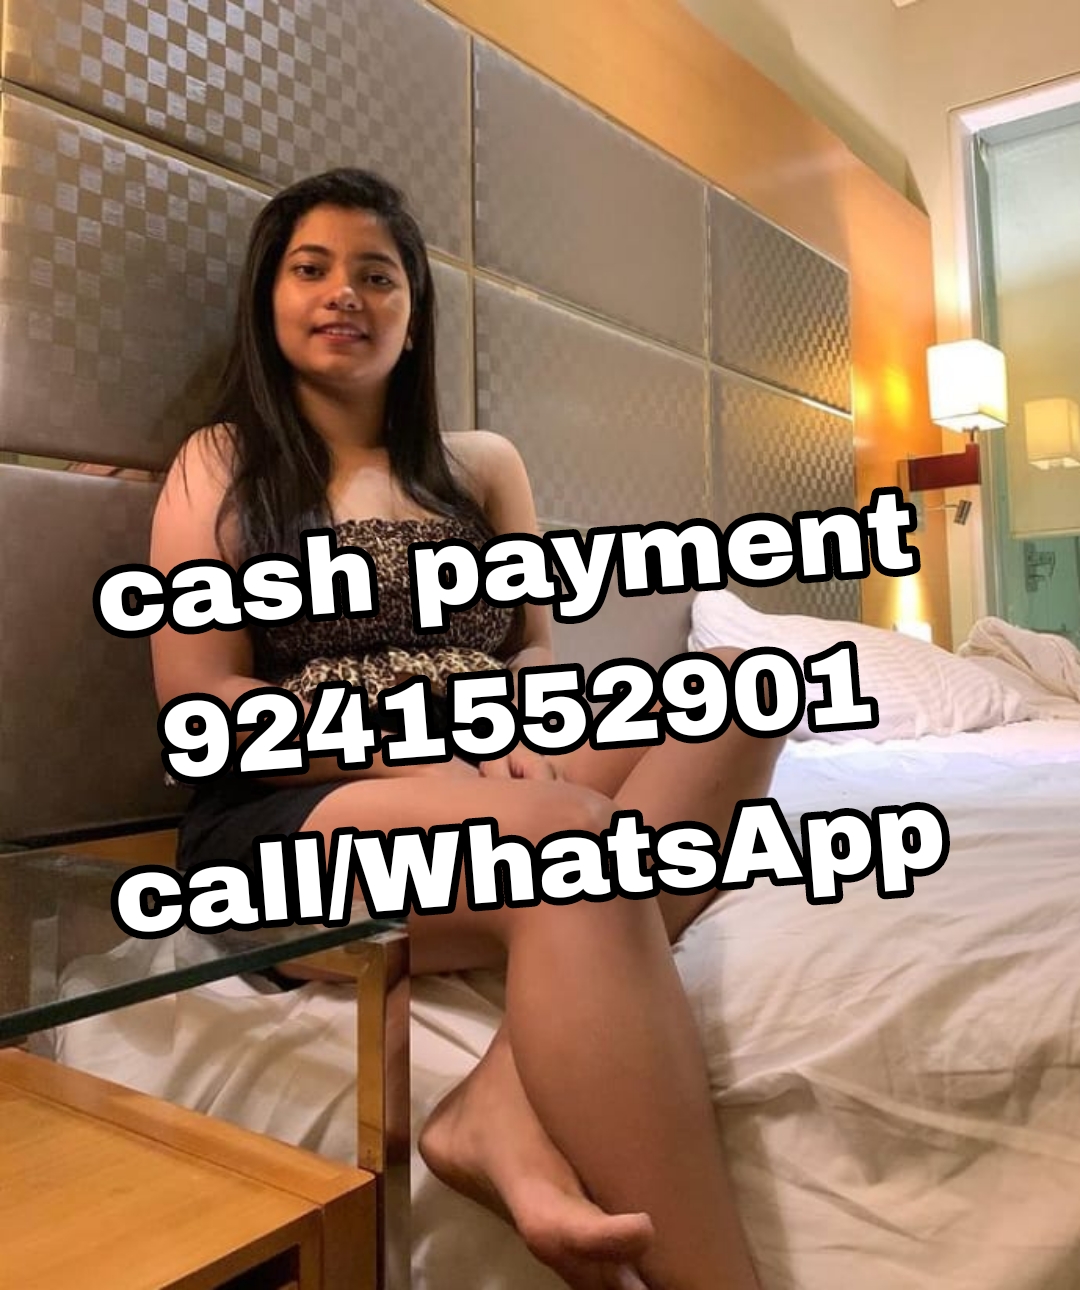 BILASPUR IN BEST SERVICE LOW PRICE FULL TRUSTED SERVICE AVAILABLE 